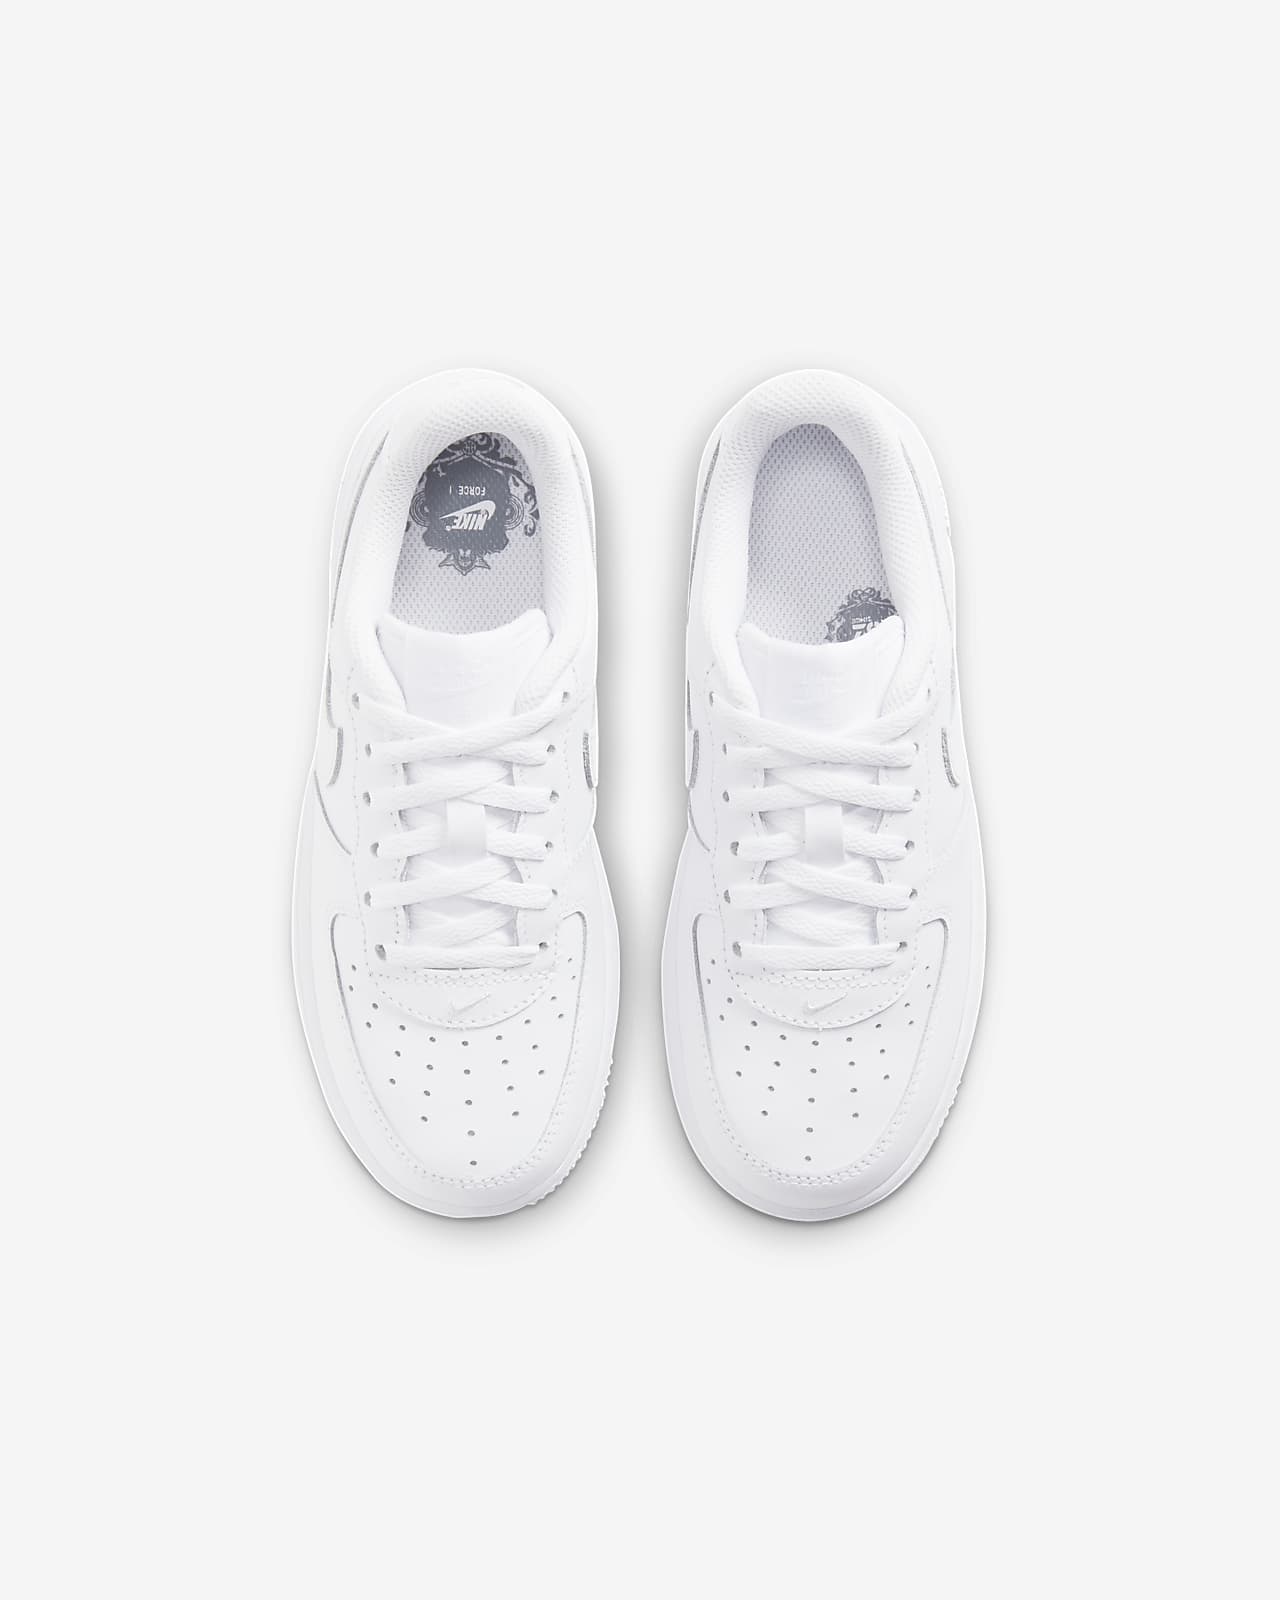 Nike Kids' Air Force 1 Shoes